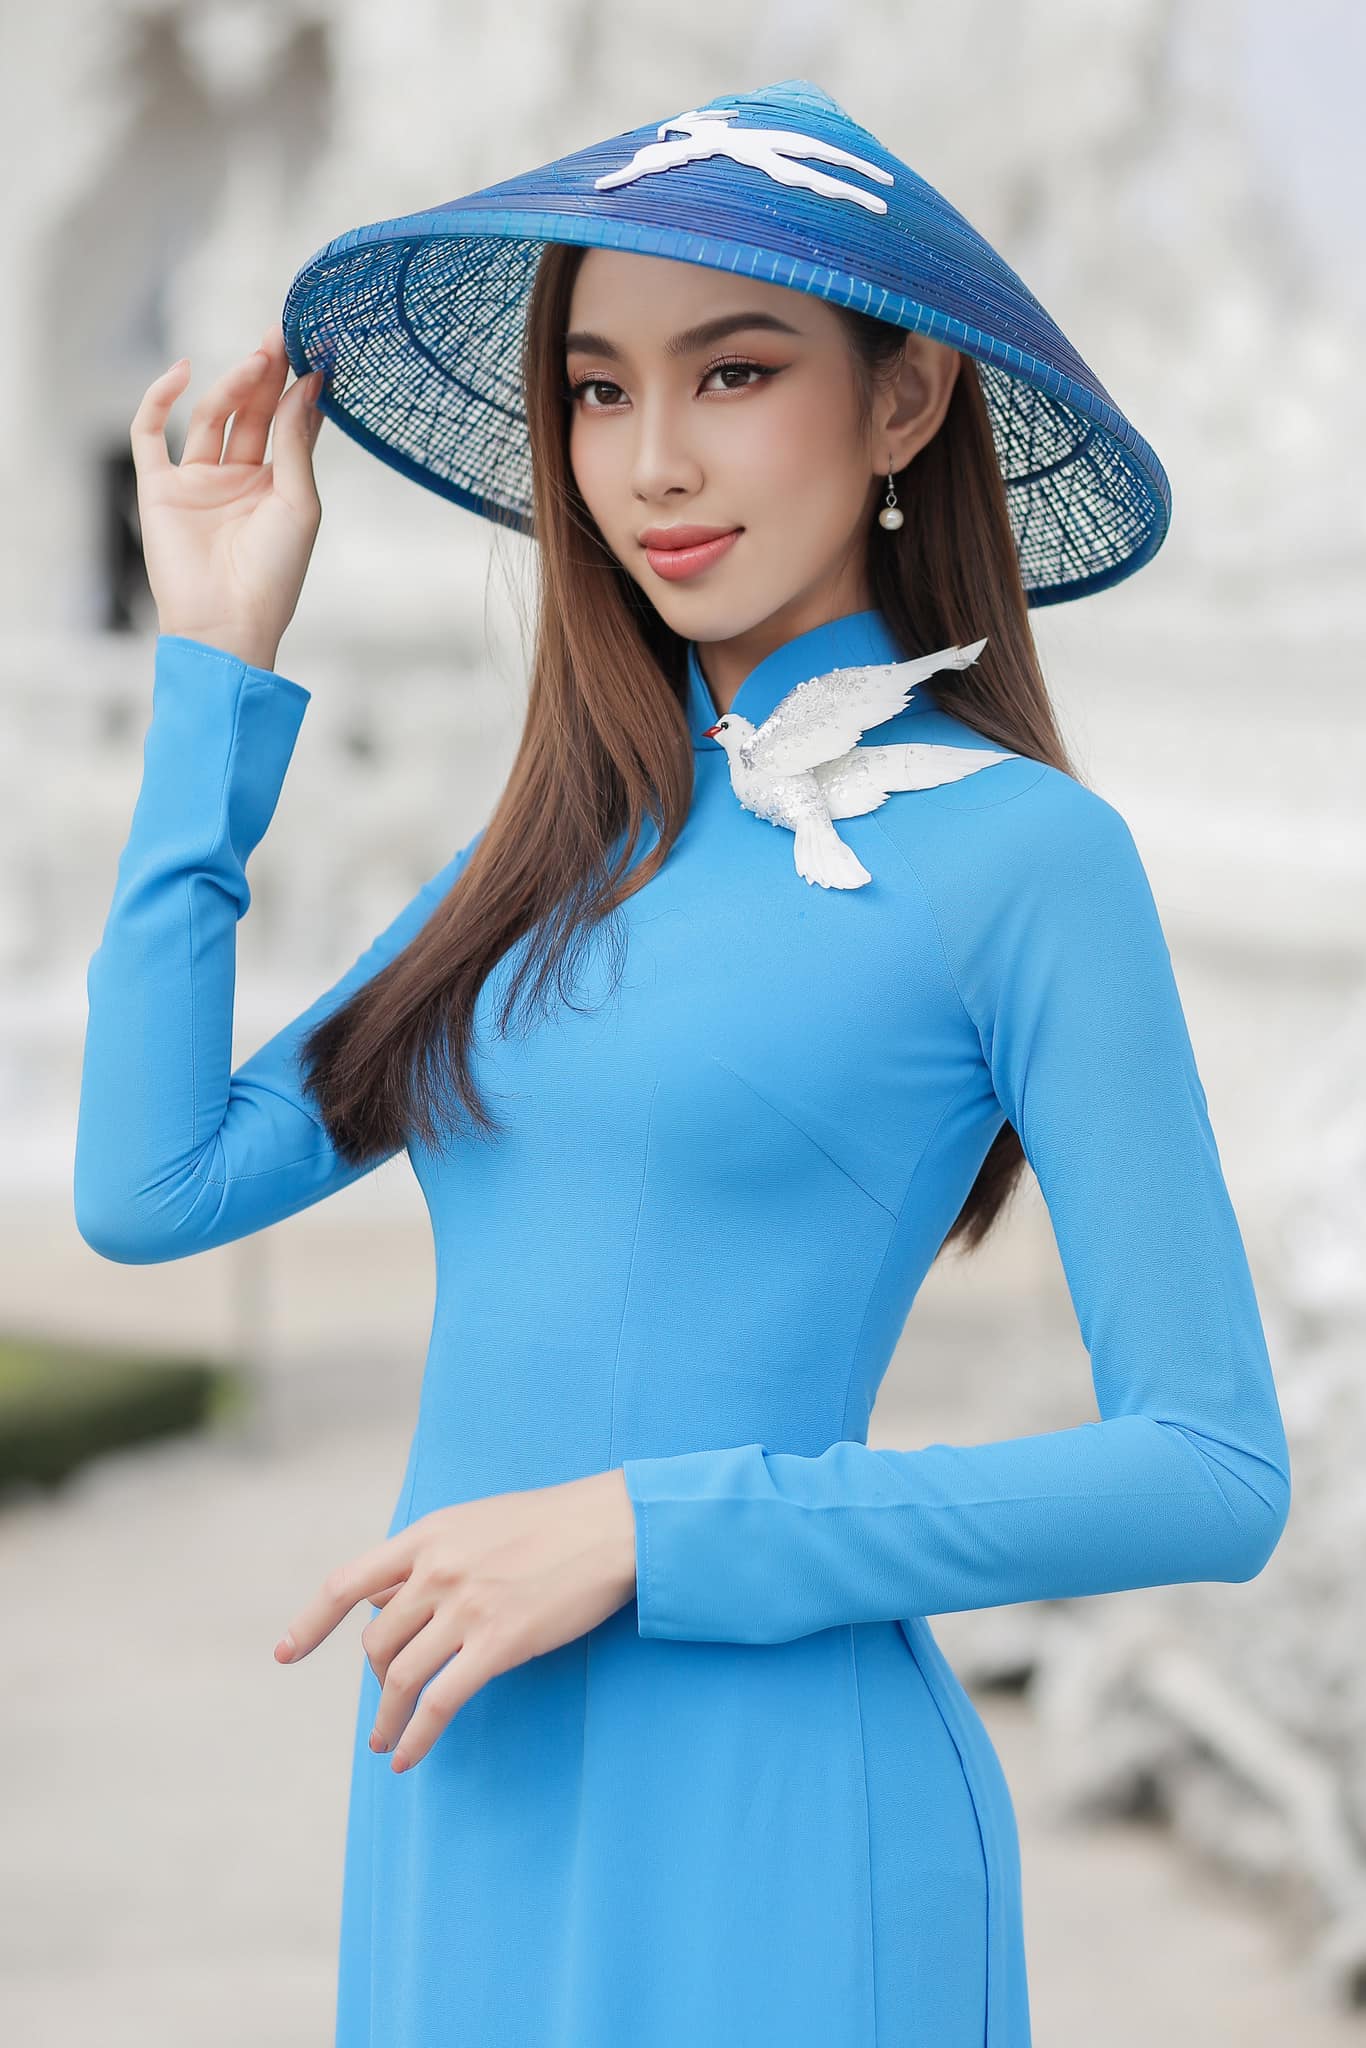 Nguyen Thuc Thuy Tien is seen wearing ao dai (Vietnamese traditional costume) and poses in a photo for a peace-themed series she posted on her verified Facebook page.